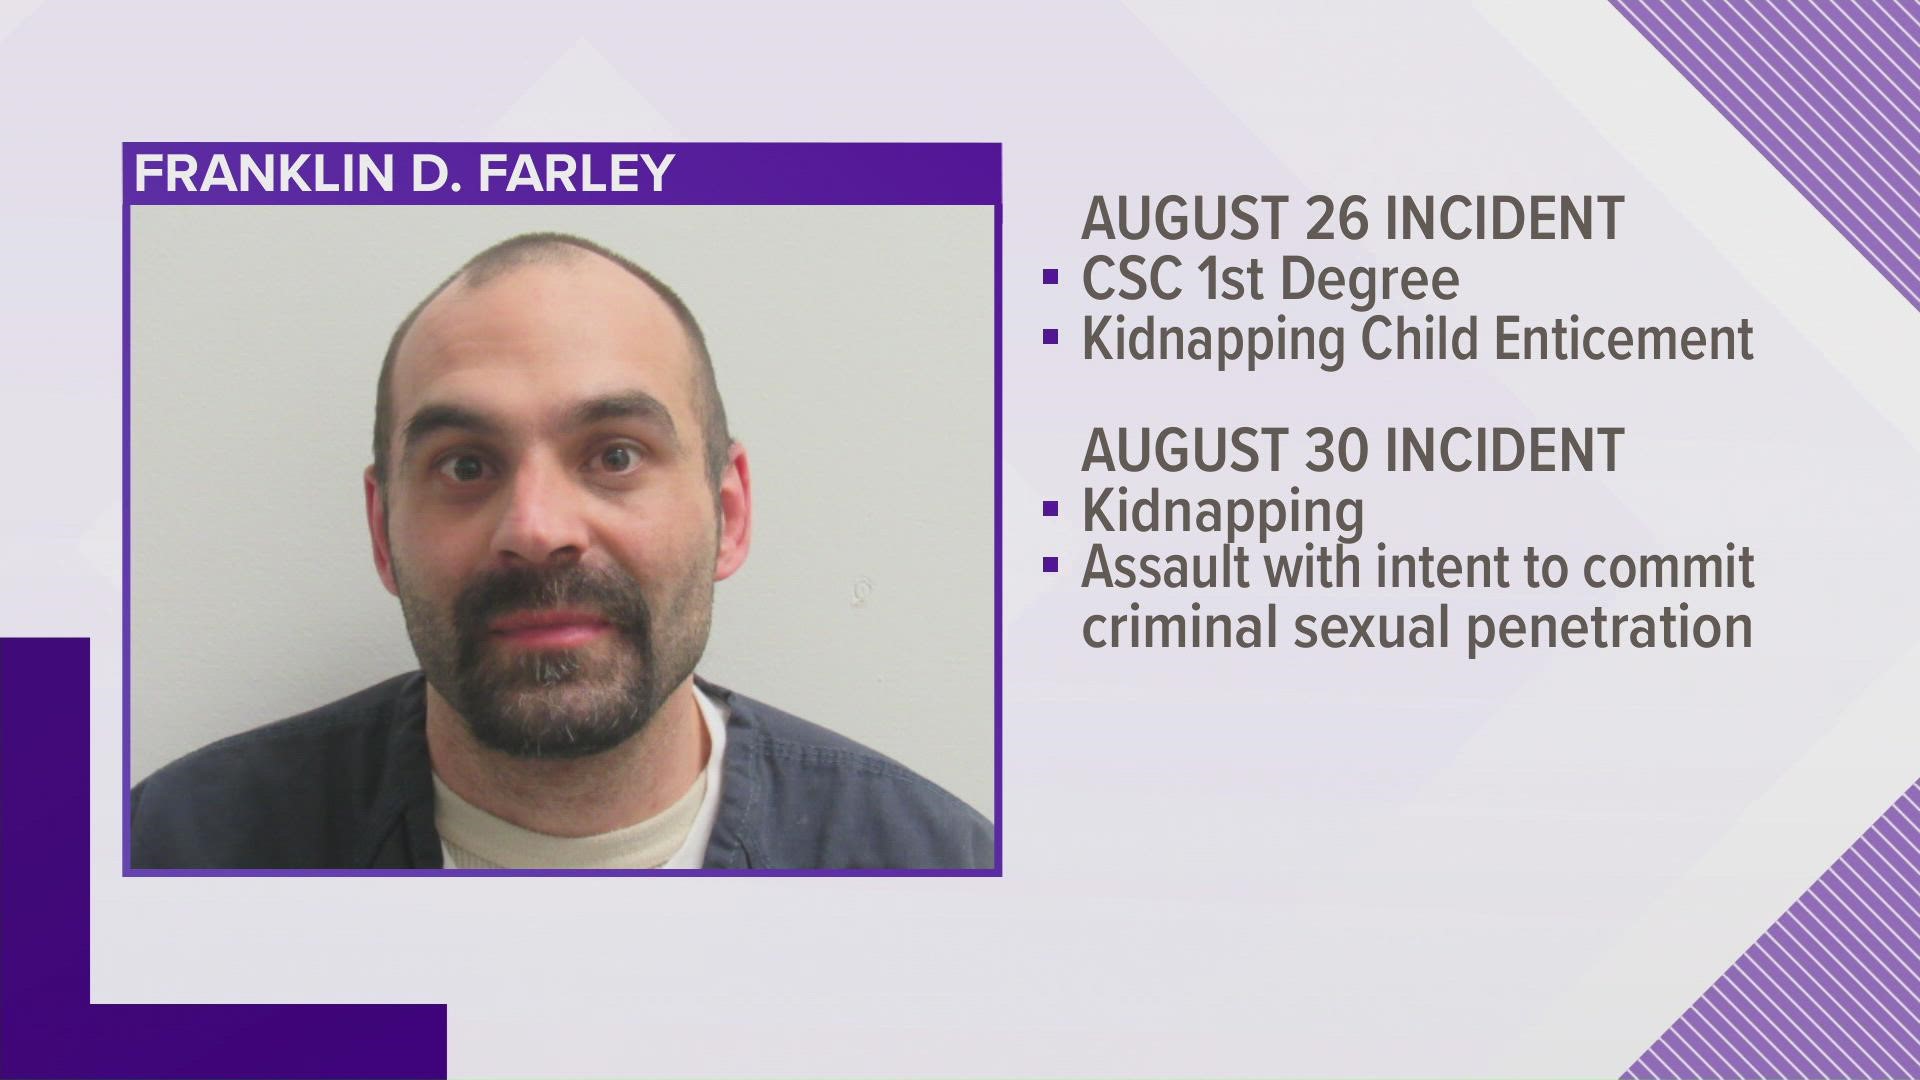 The 39-year-old now faces kidnapping and child sex crime charges.